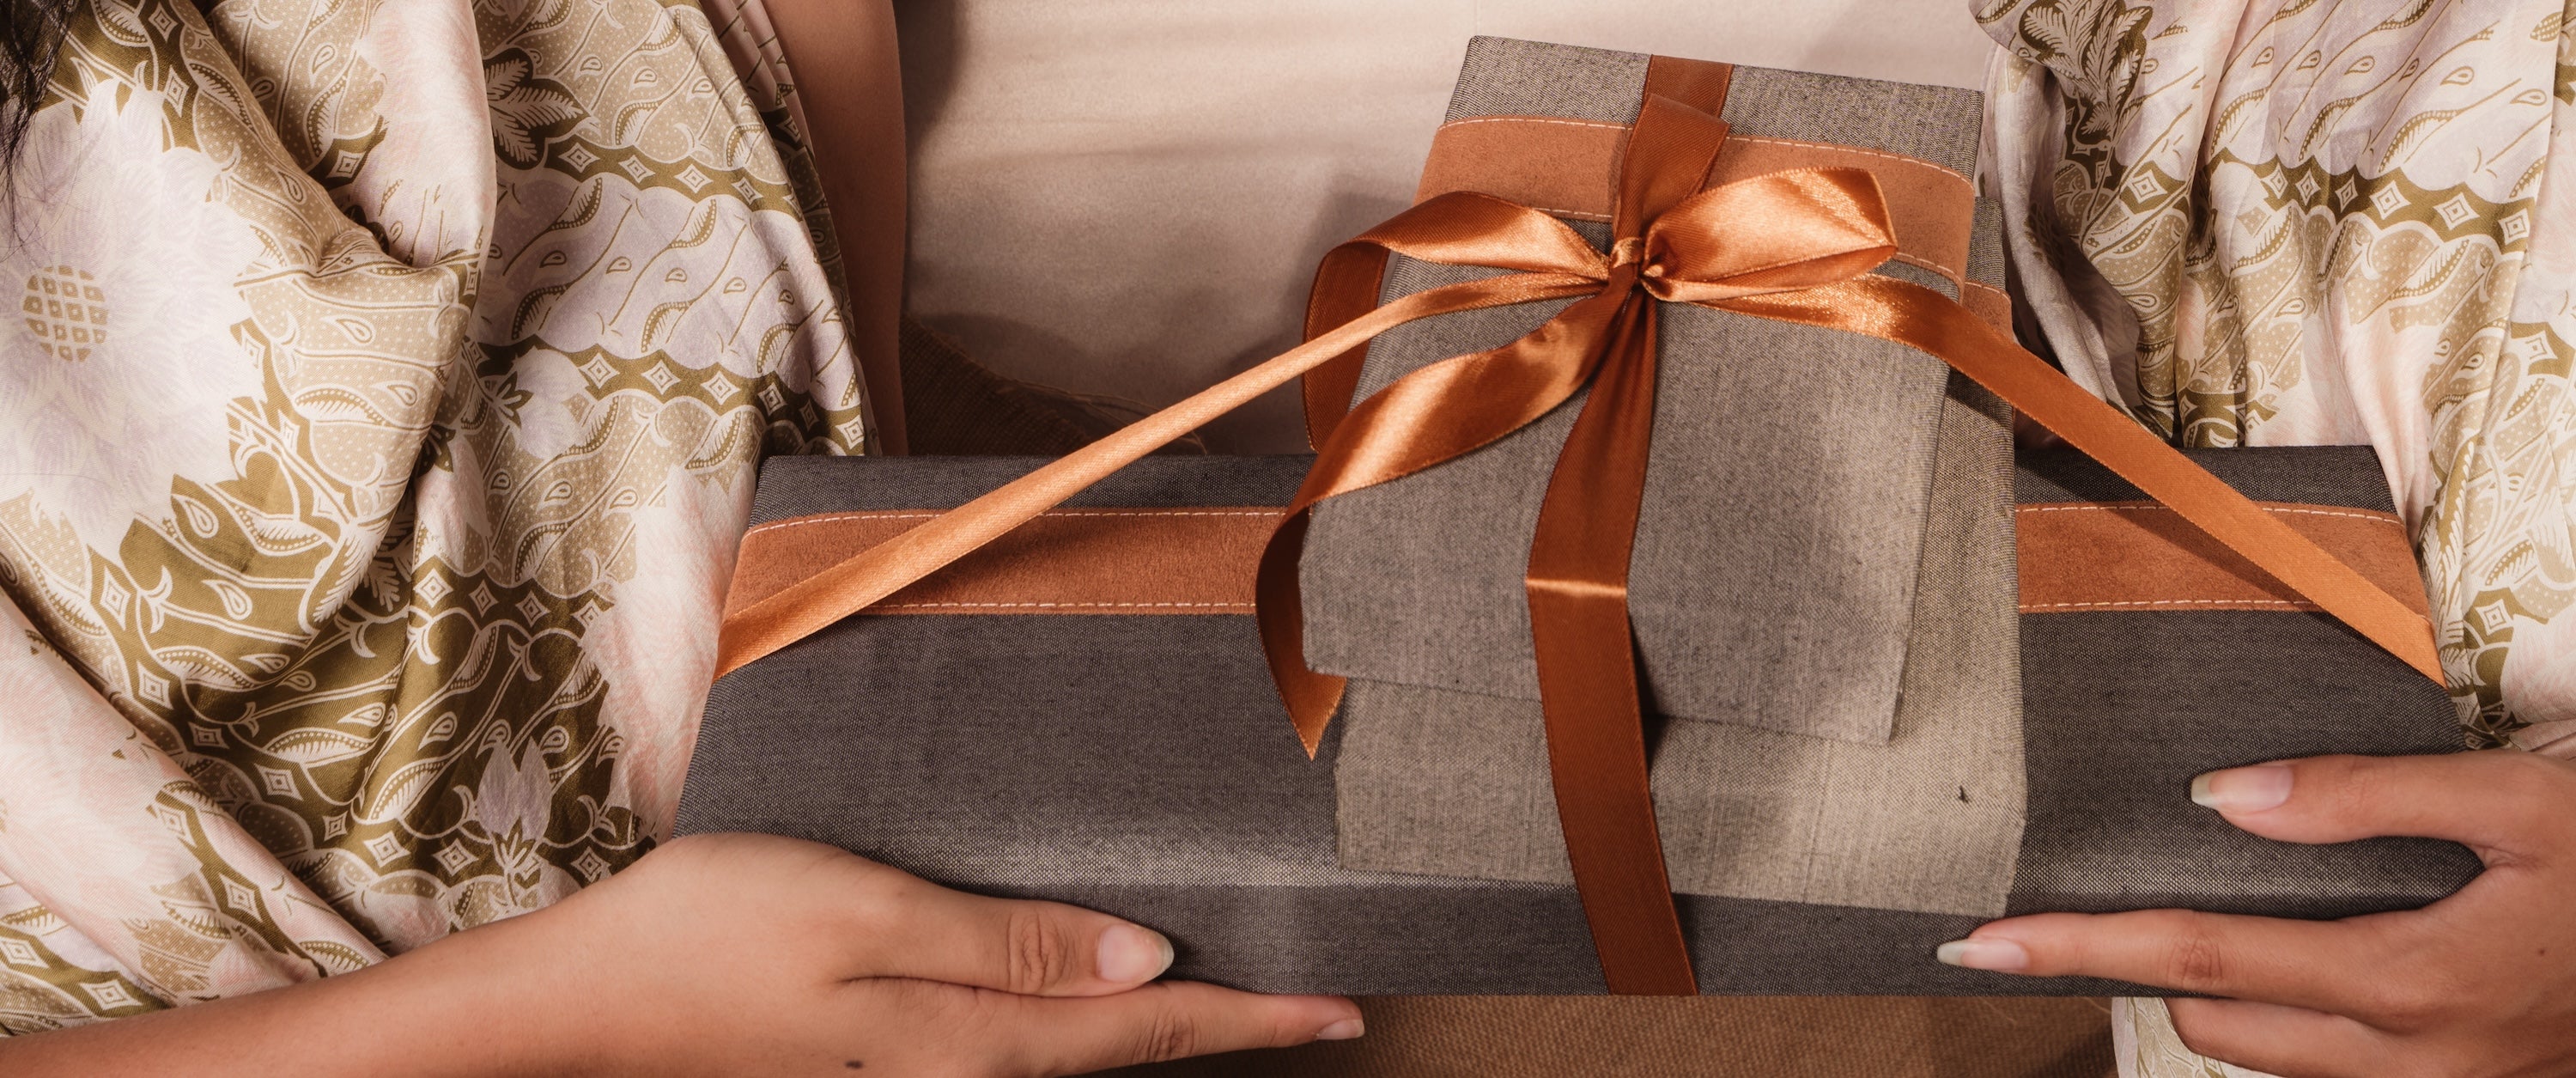 A woman holding a gift wrapped in brown paper.